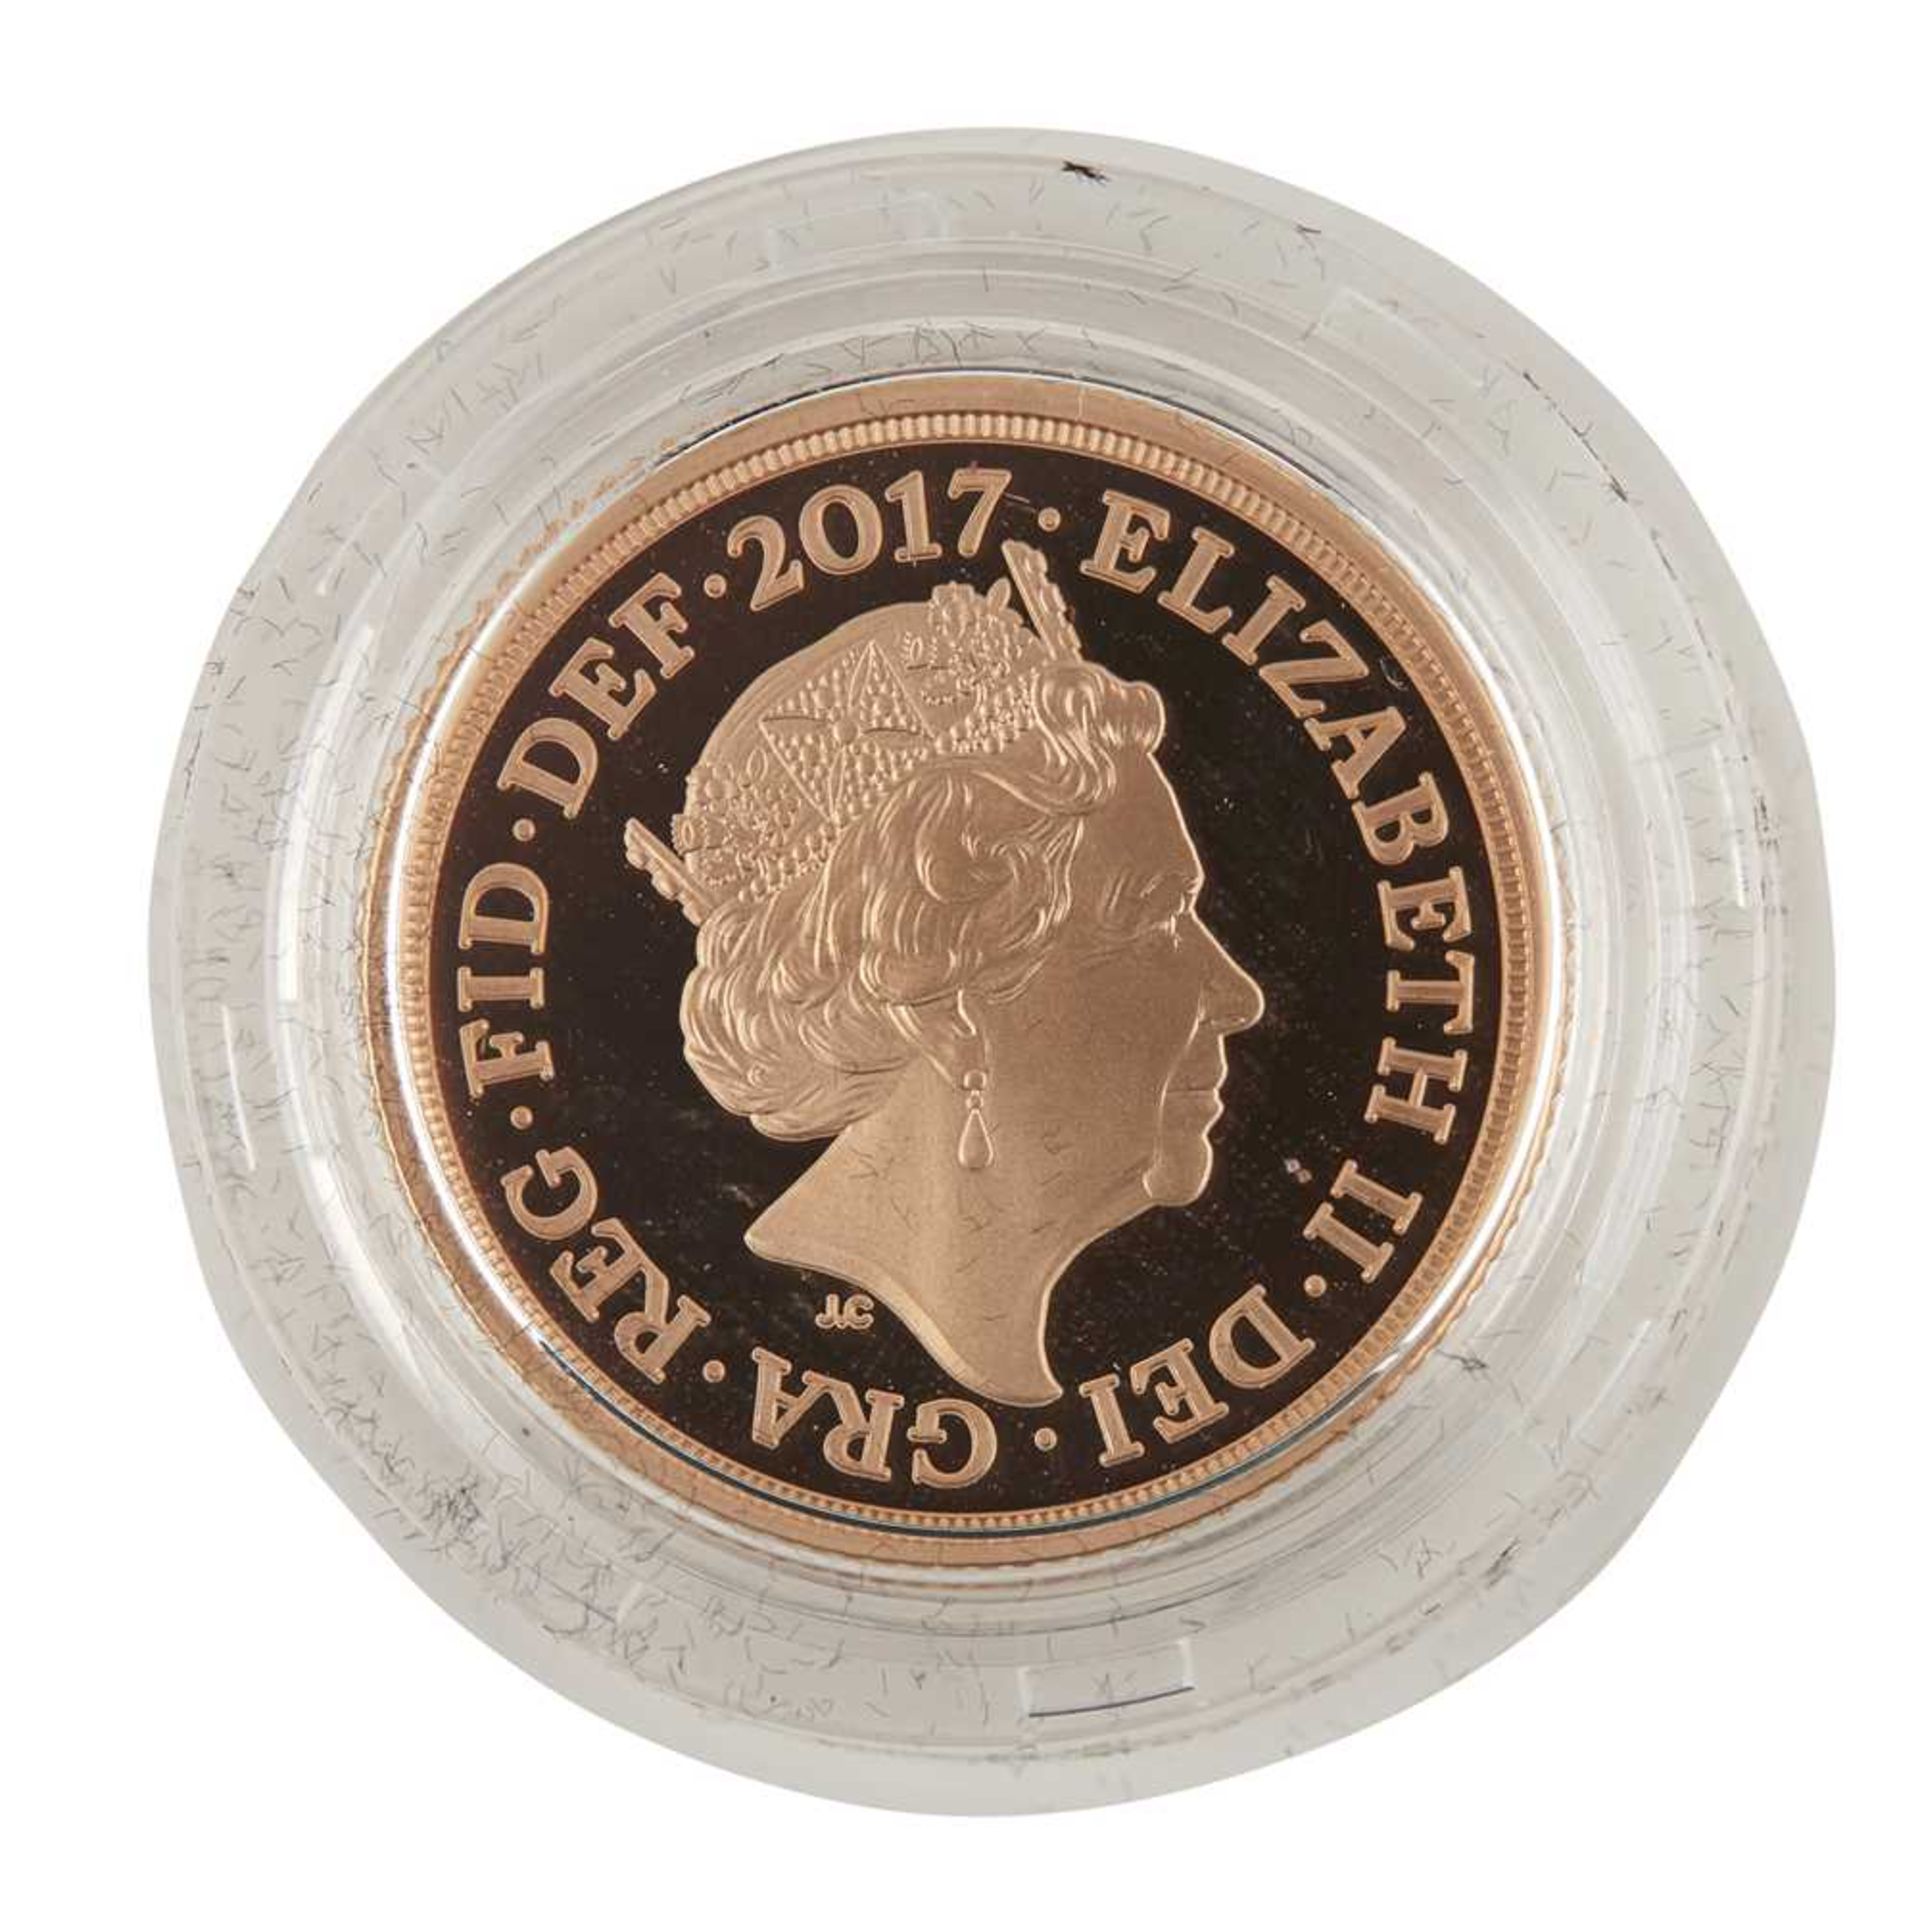 A 2017 Piedfort proof sovereign